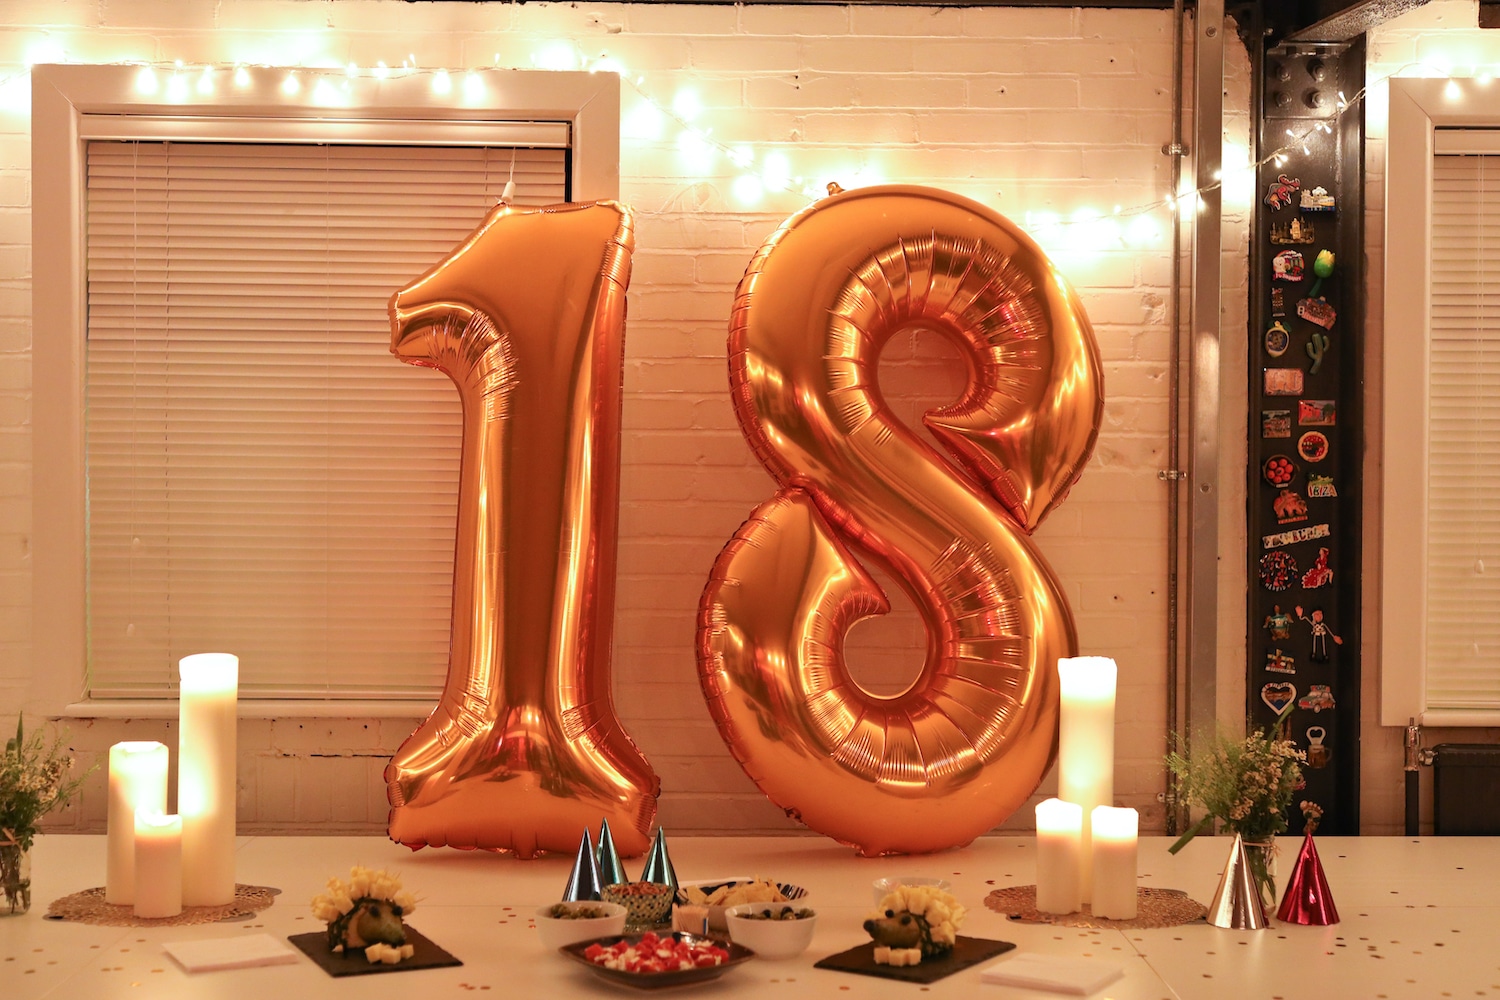 Number 1 and number 8 Balloons on a table, surrounded by treats and candles.